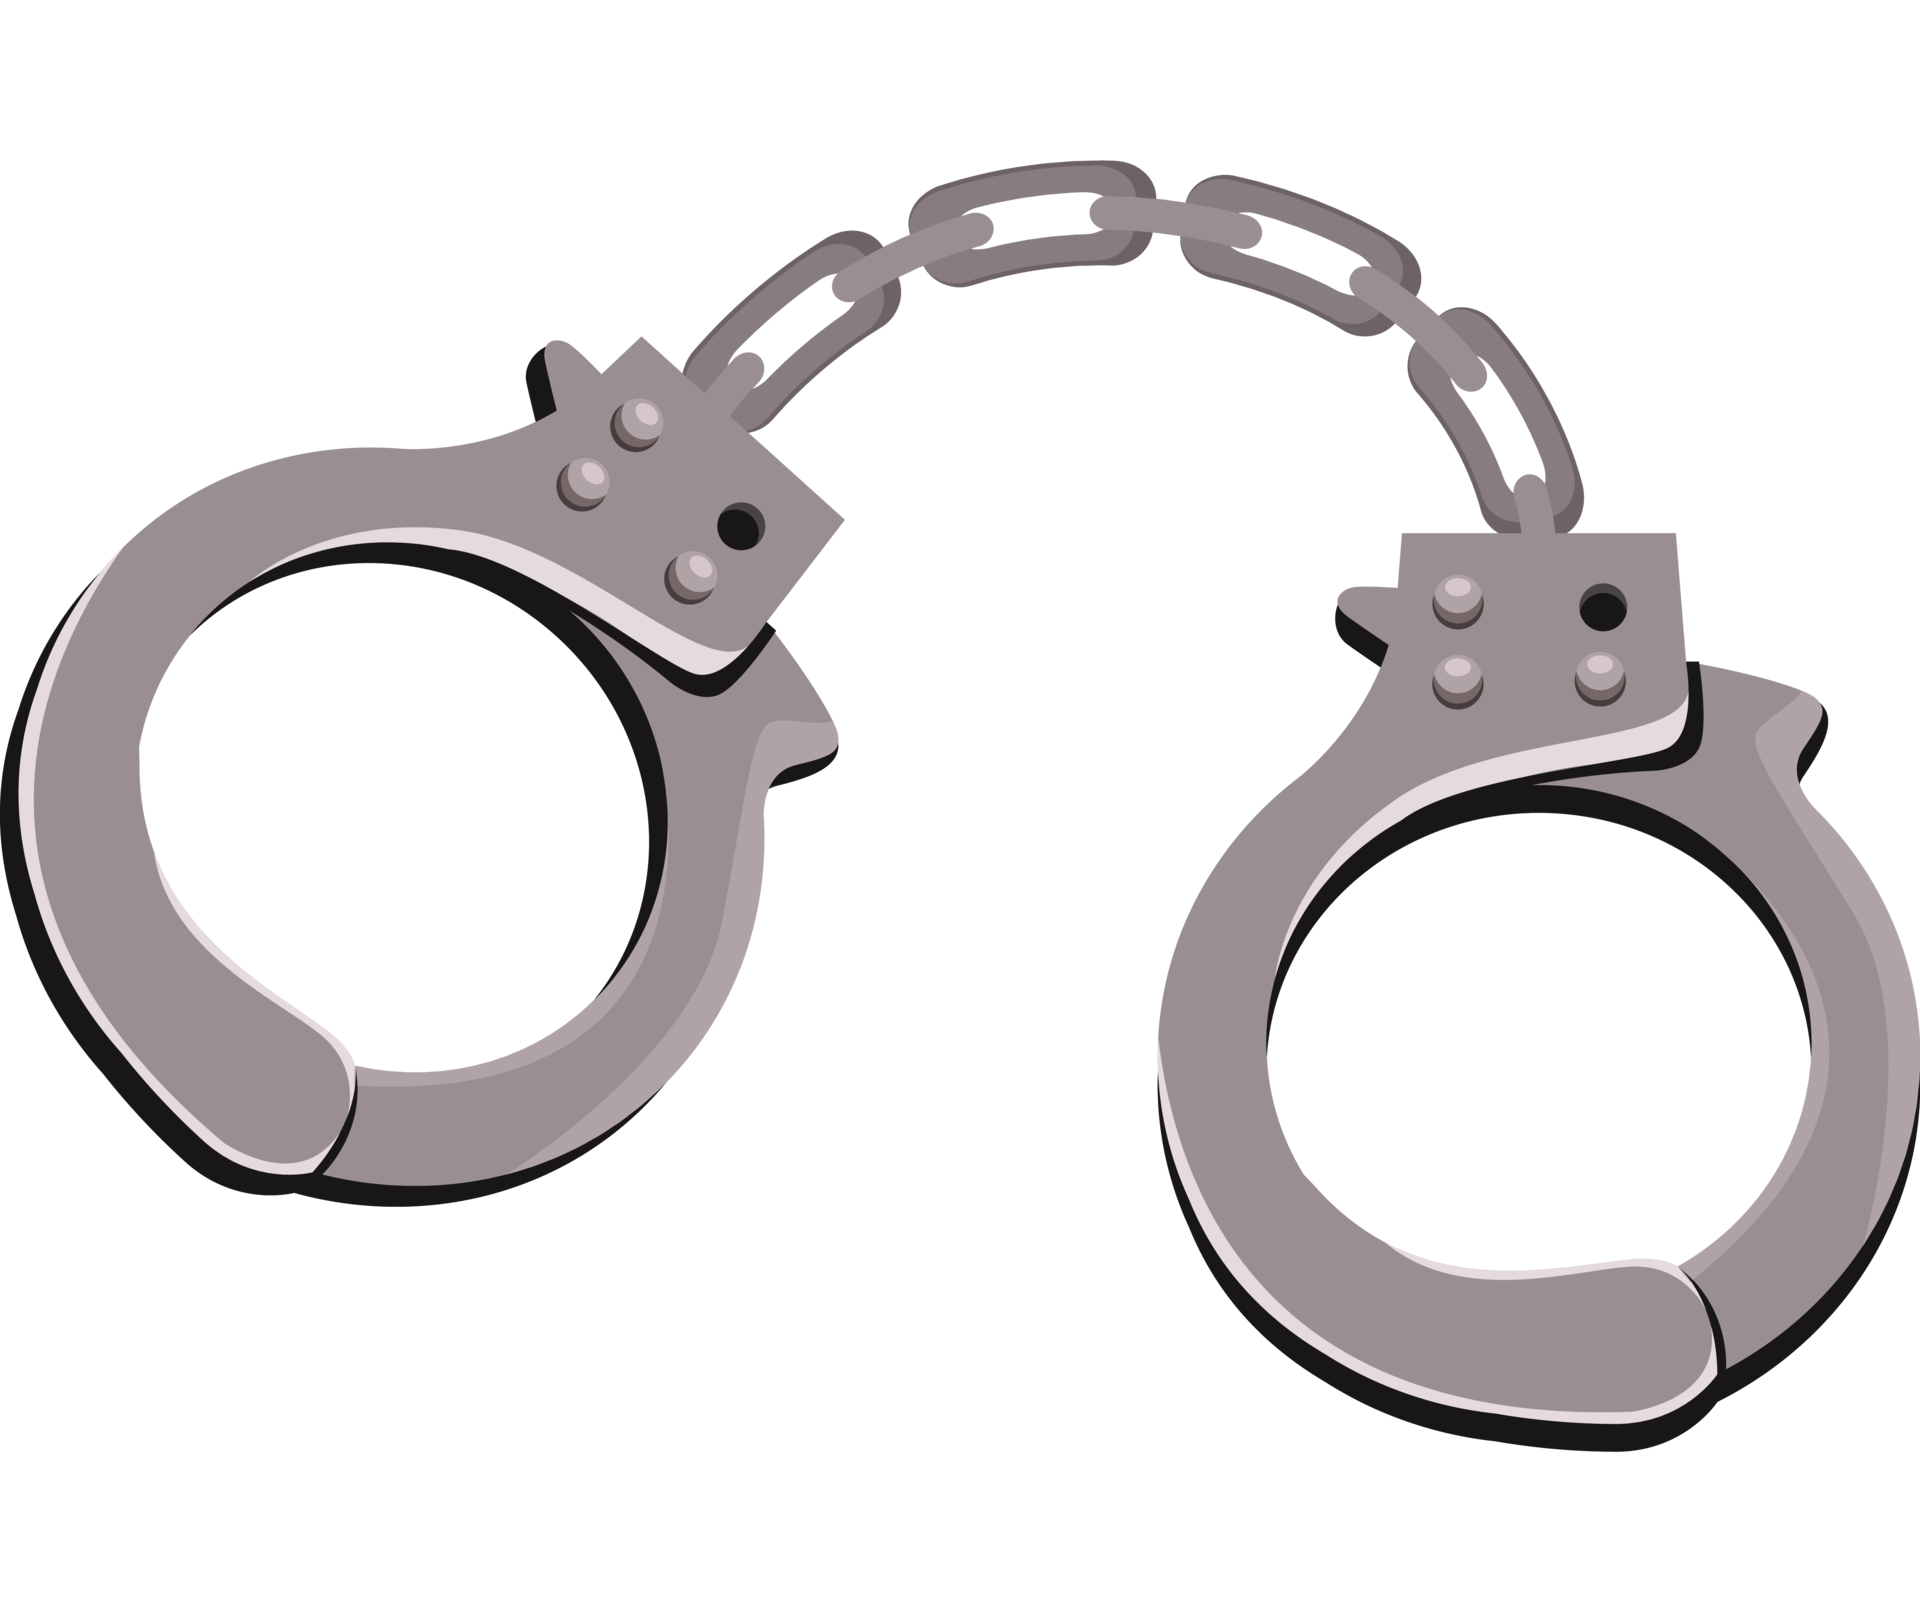 Handcuffs PNG Image